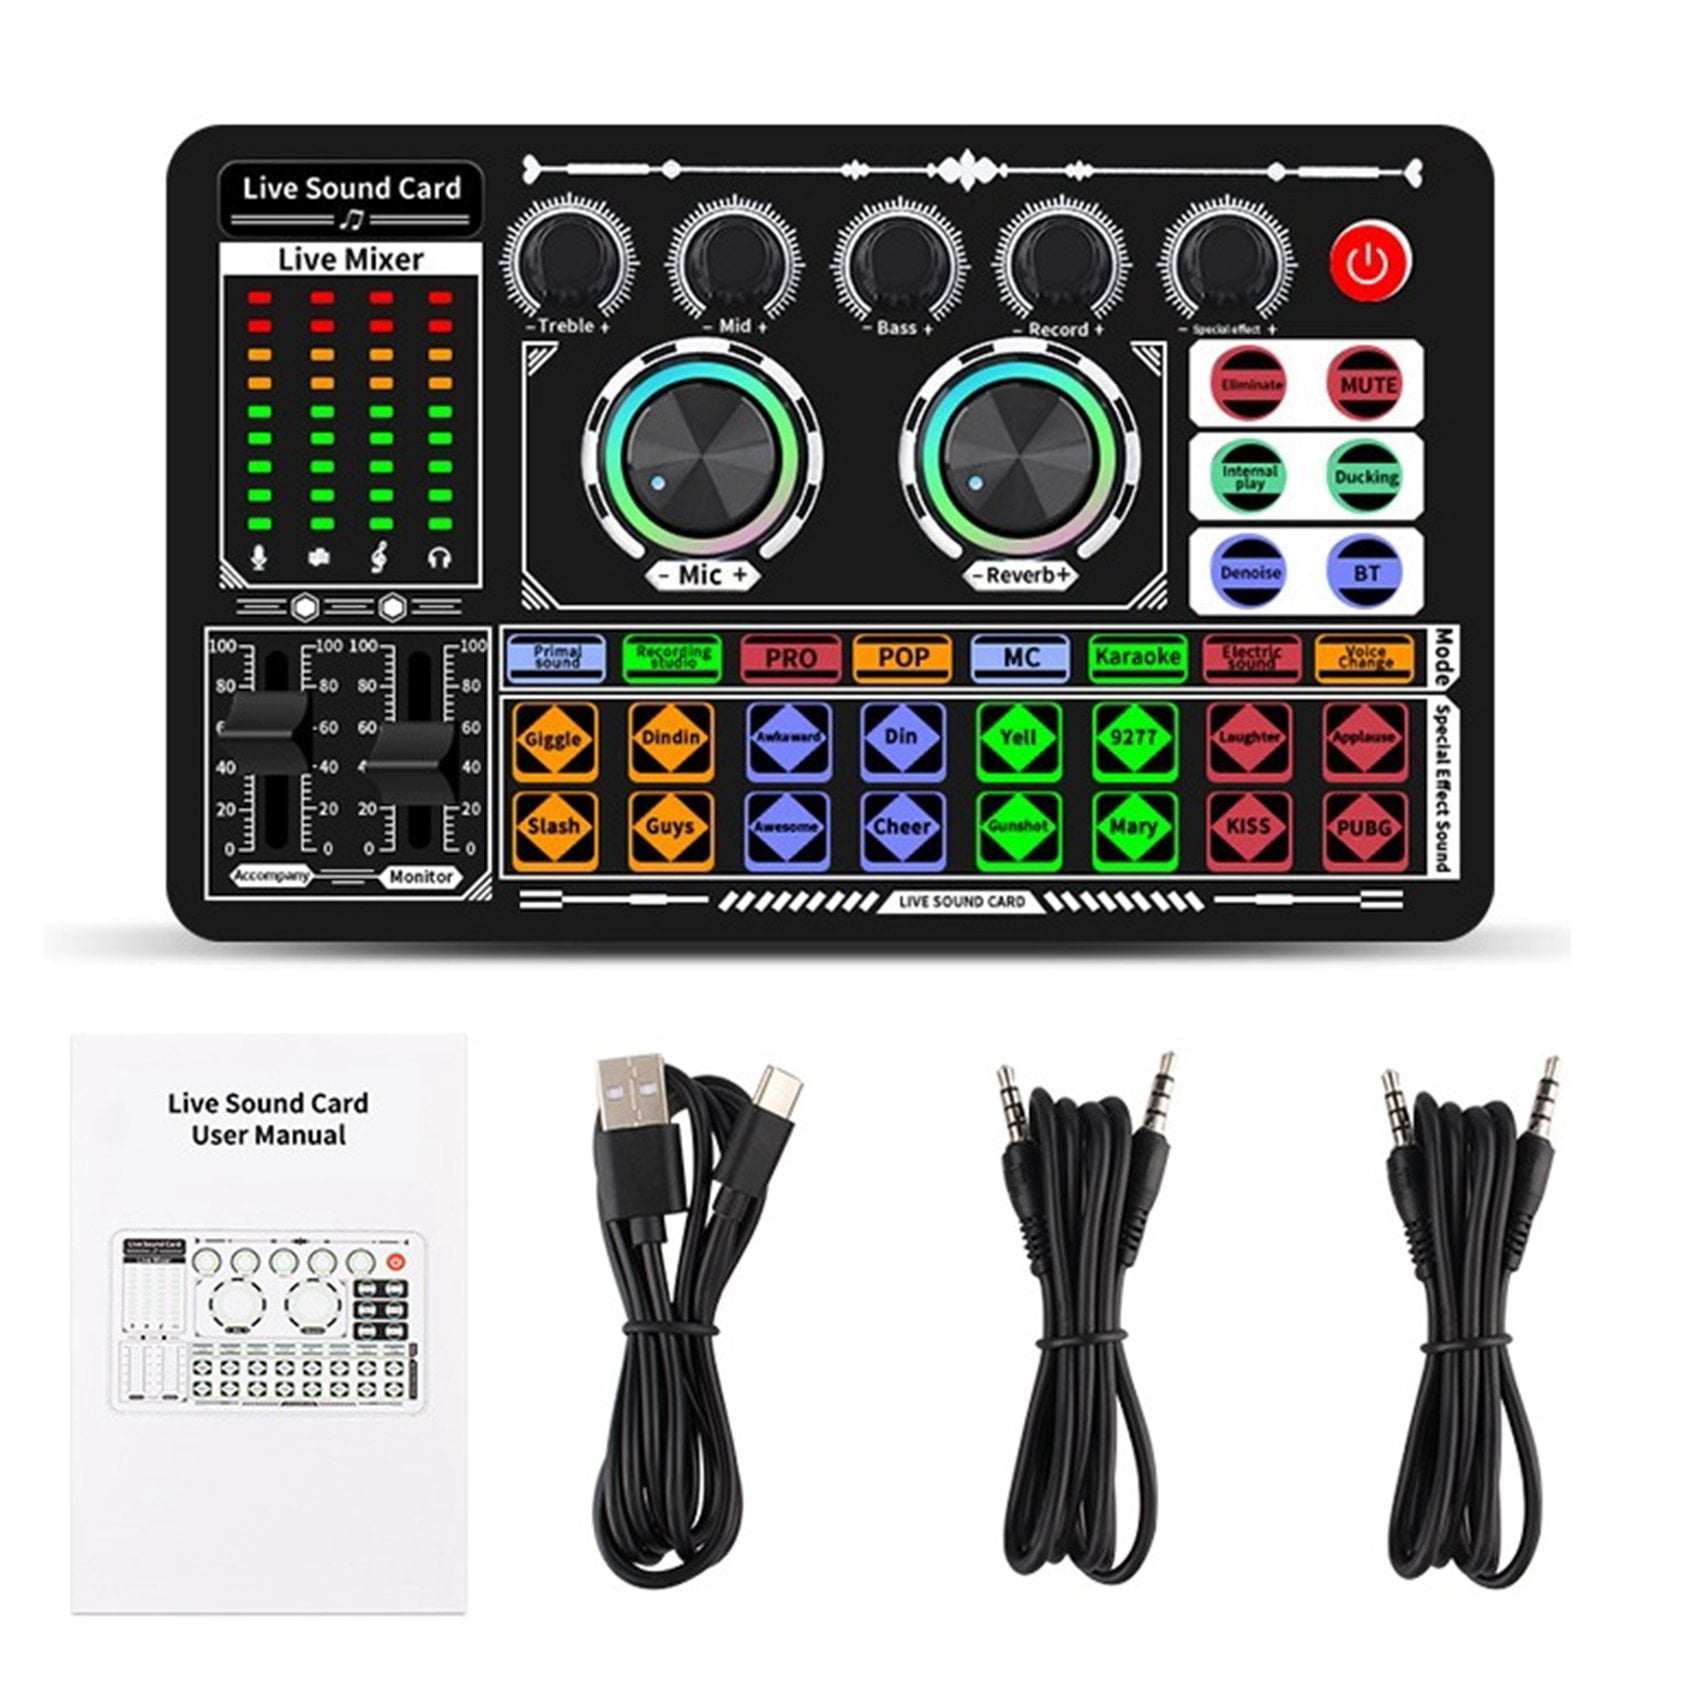 F999 Sound Card Audio Mixer Live Sound Card Voice Changer Mixing ...